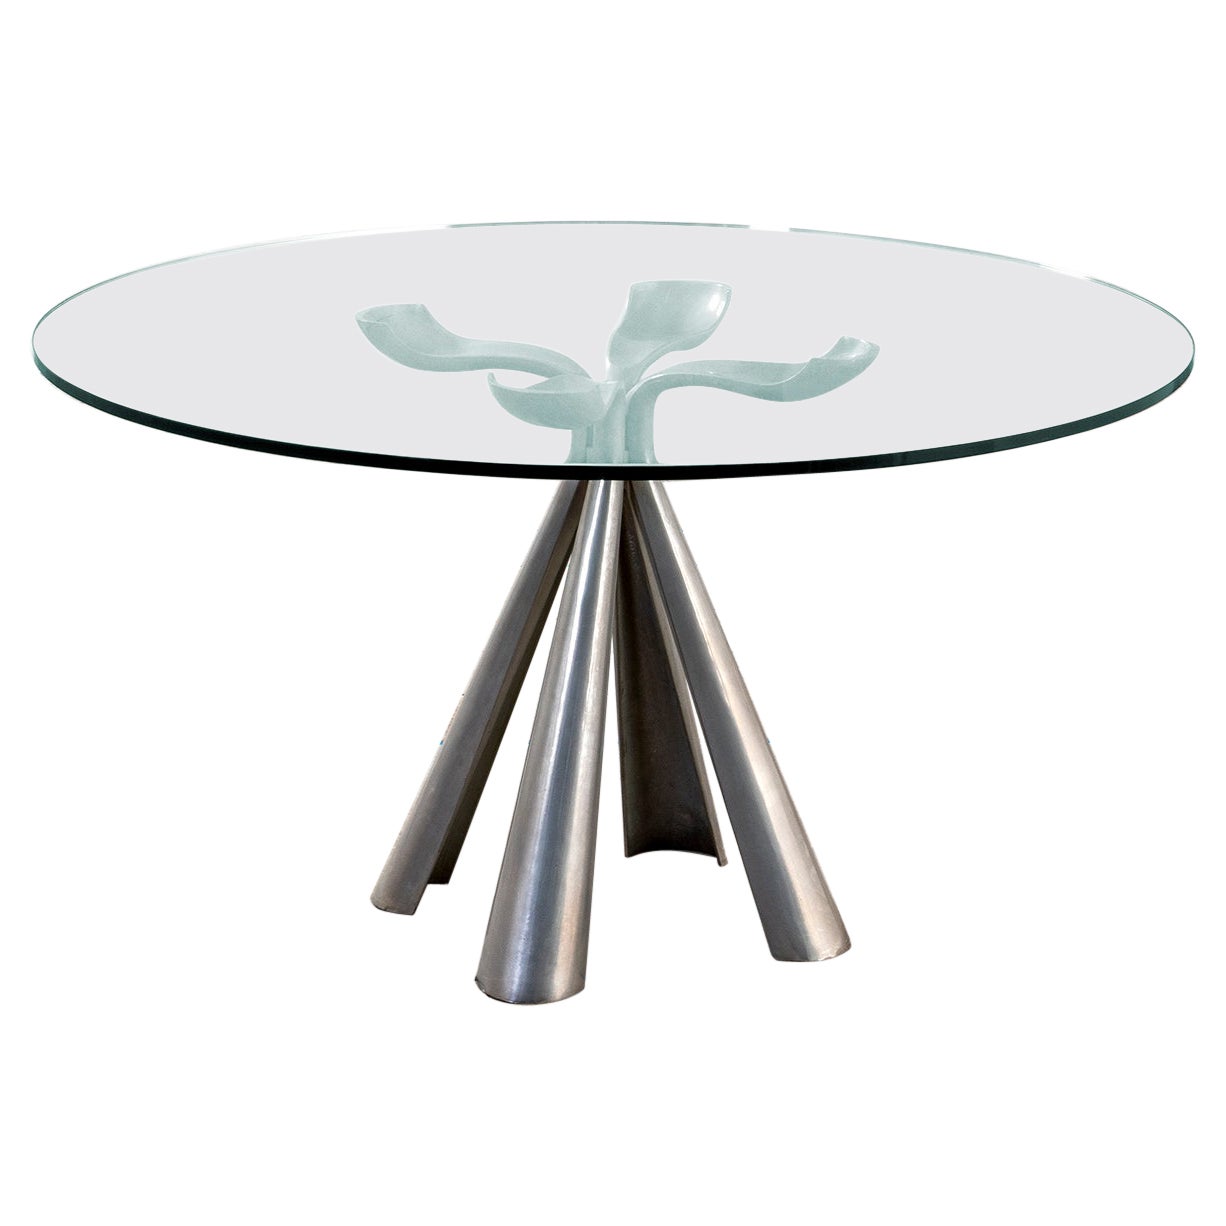 20th Century Vittorio Introini Table Mod, Colby for Saporiti in Die-Cast Steel